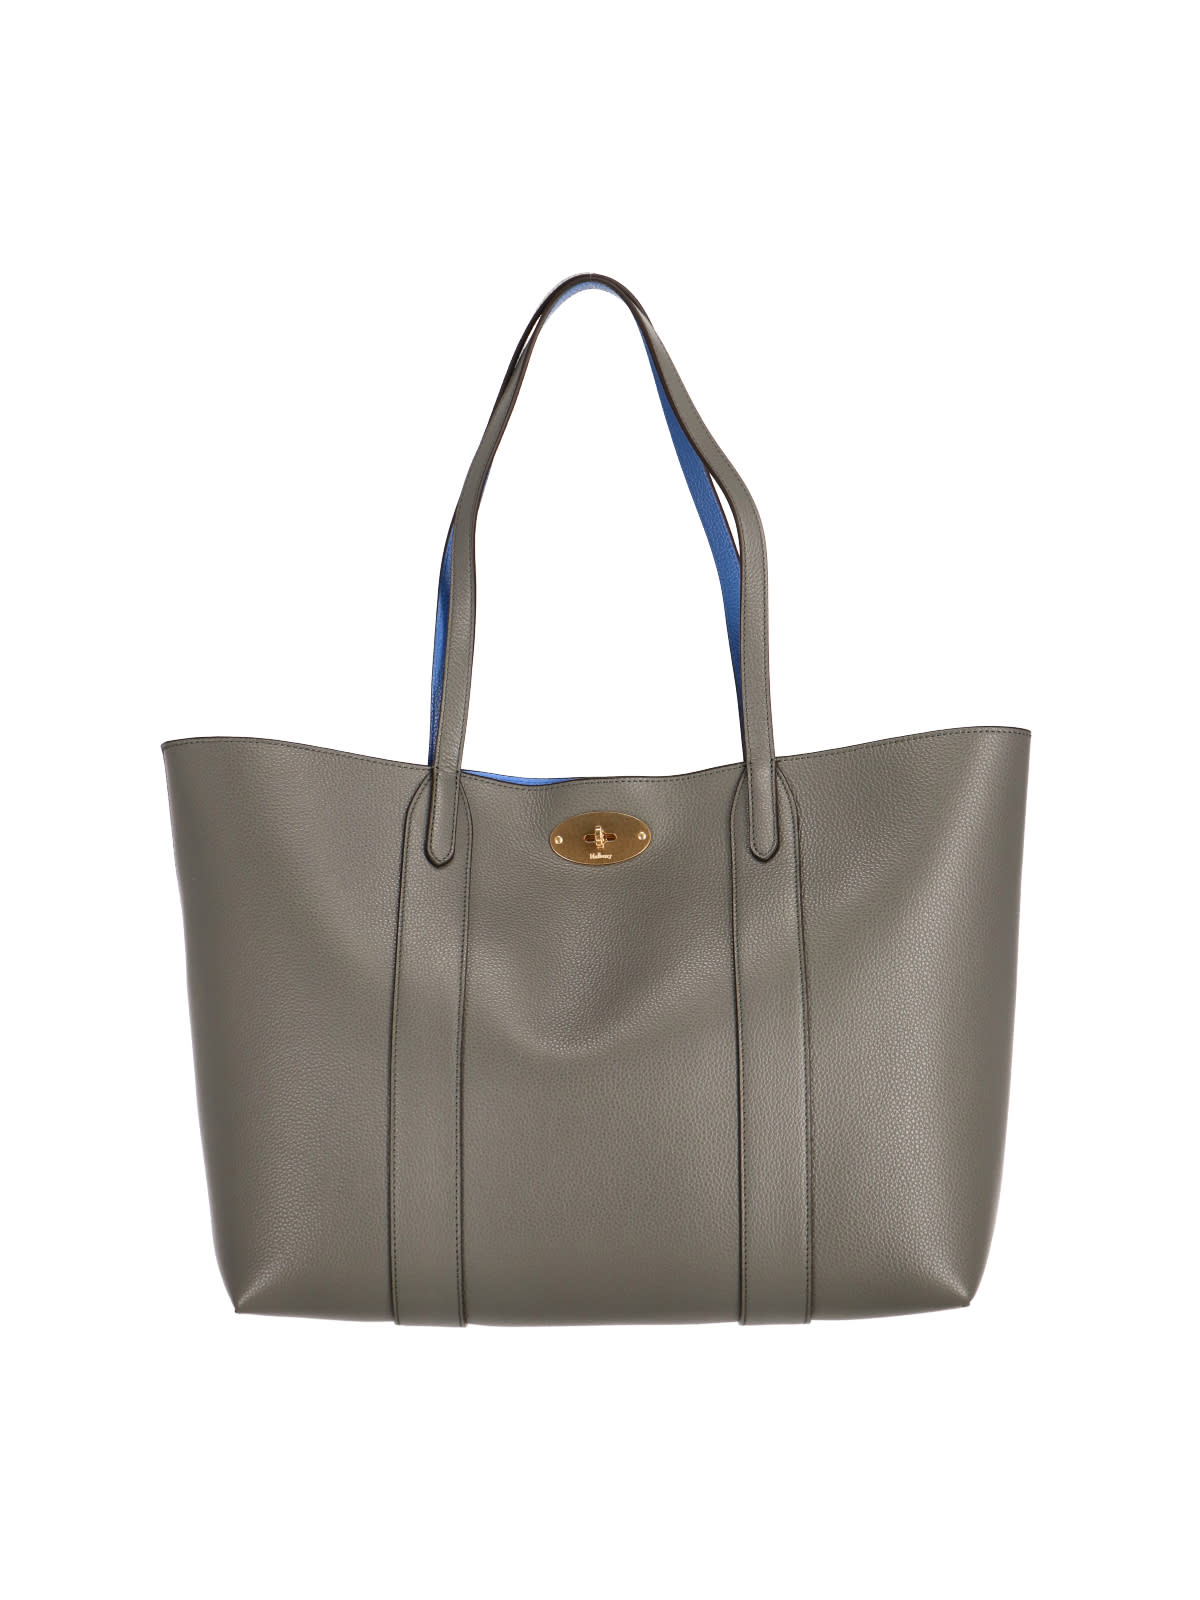 MULBERRY TOTE